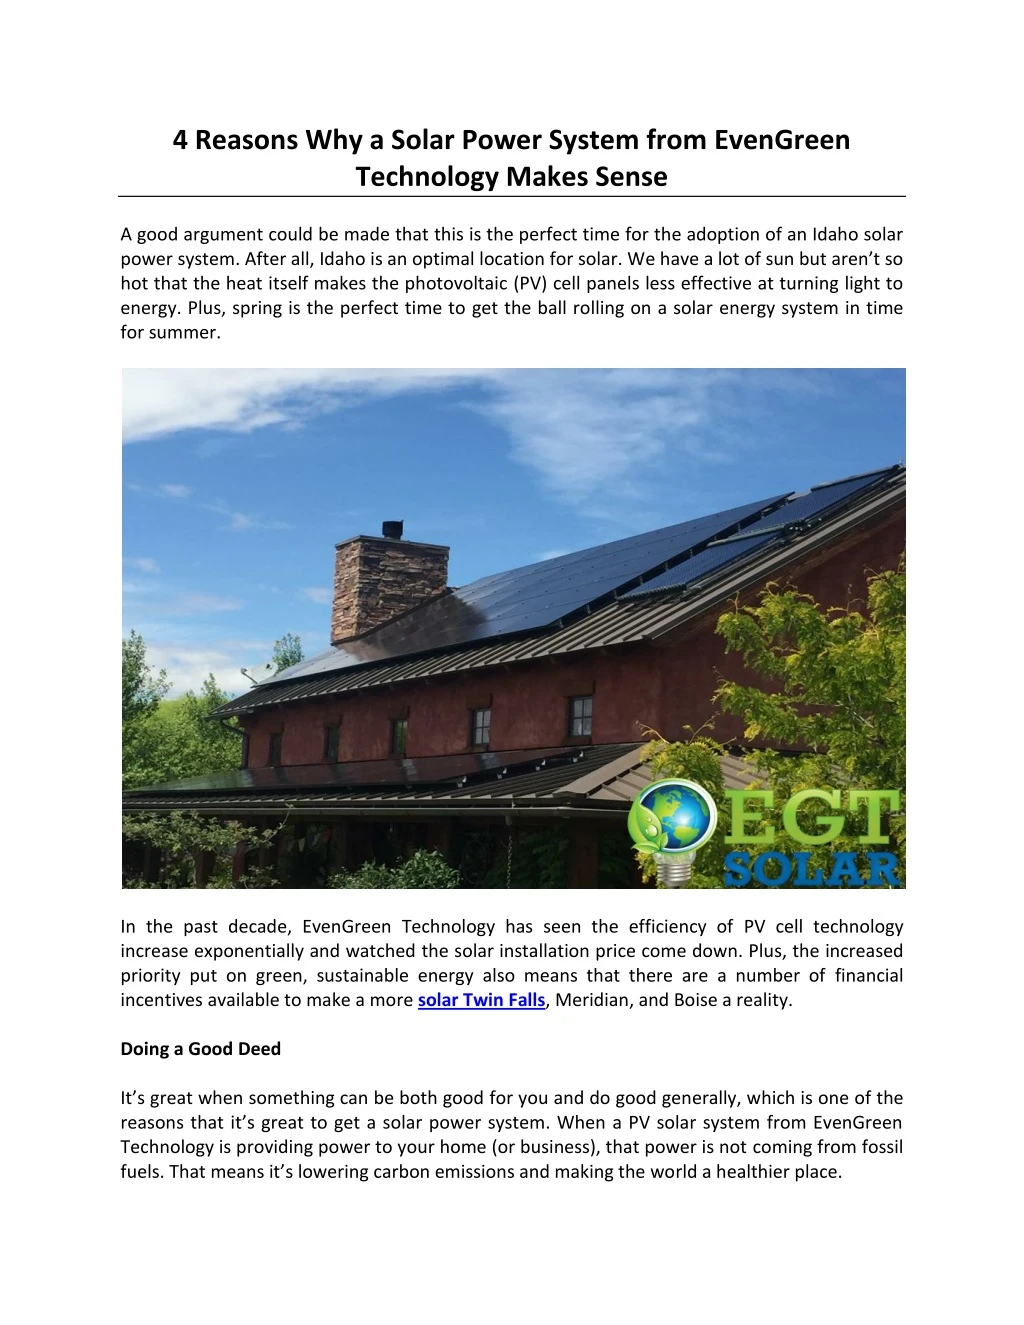 4 reasons why a solar power system from evengreen